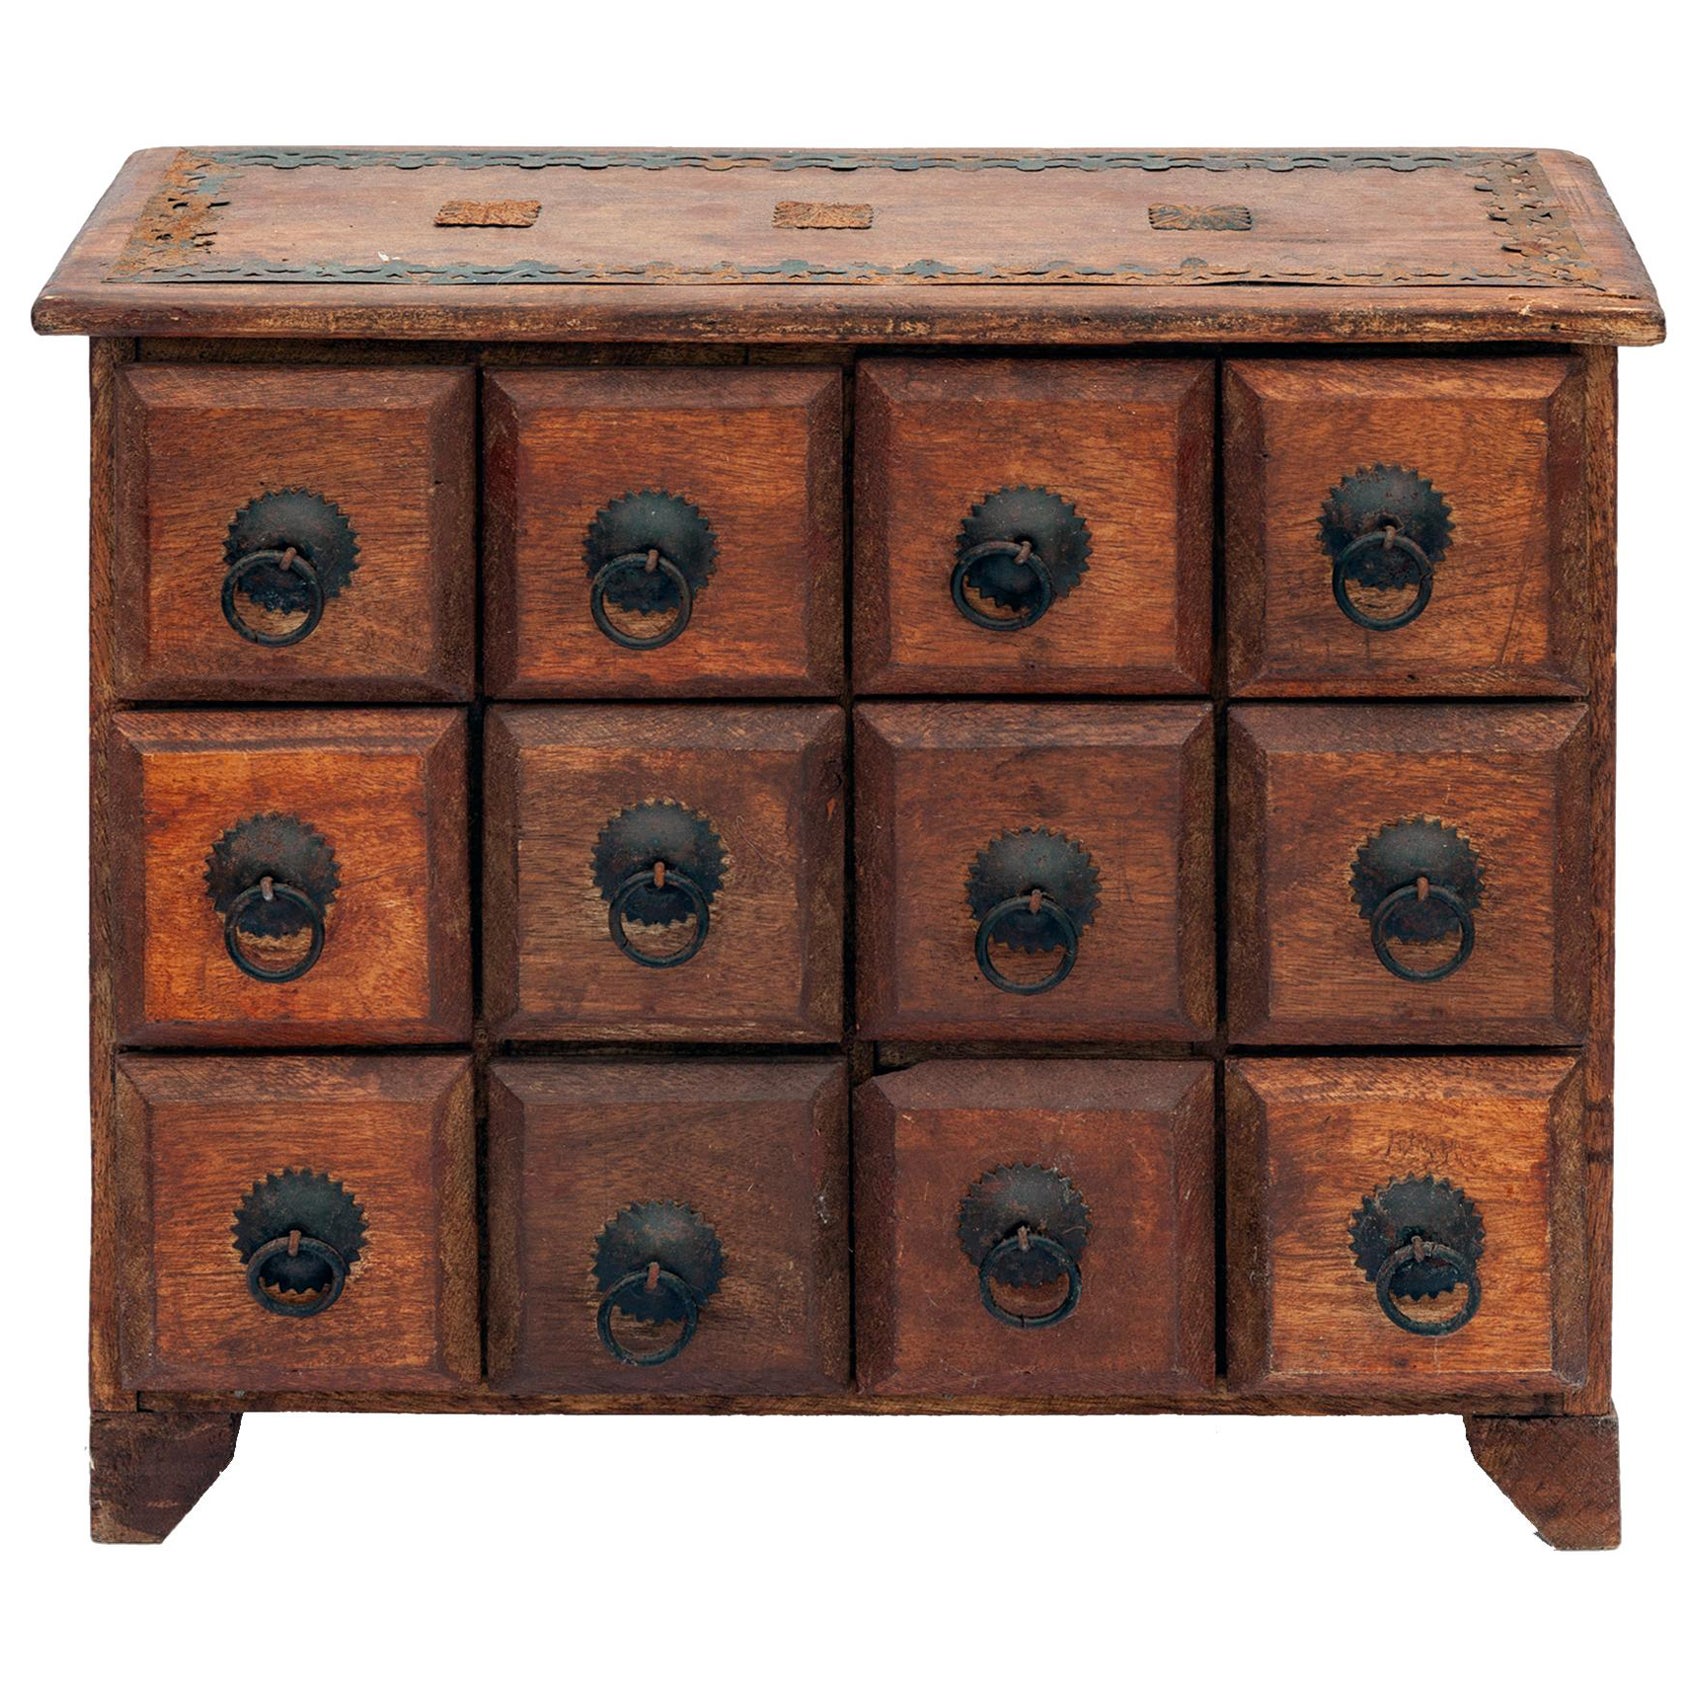 Handcrafted Indonesian Apothecary Chest